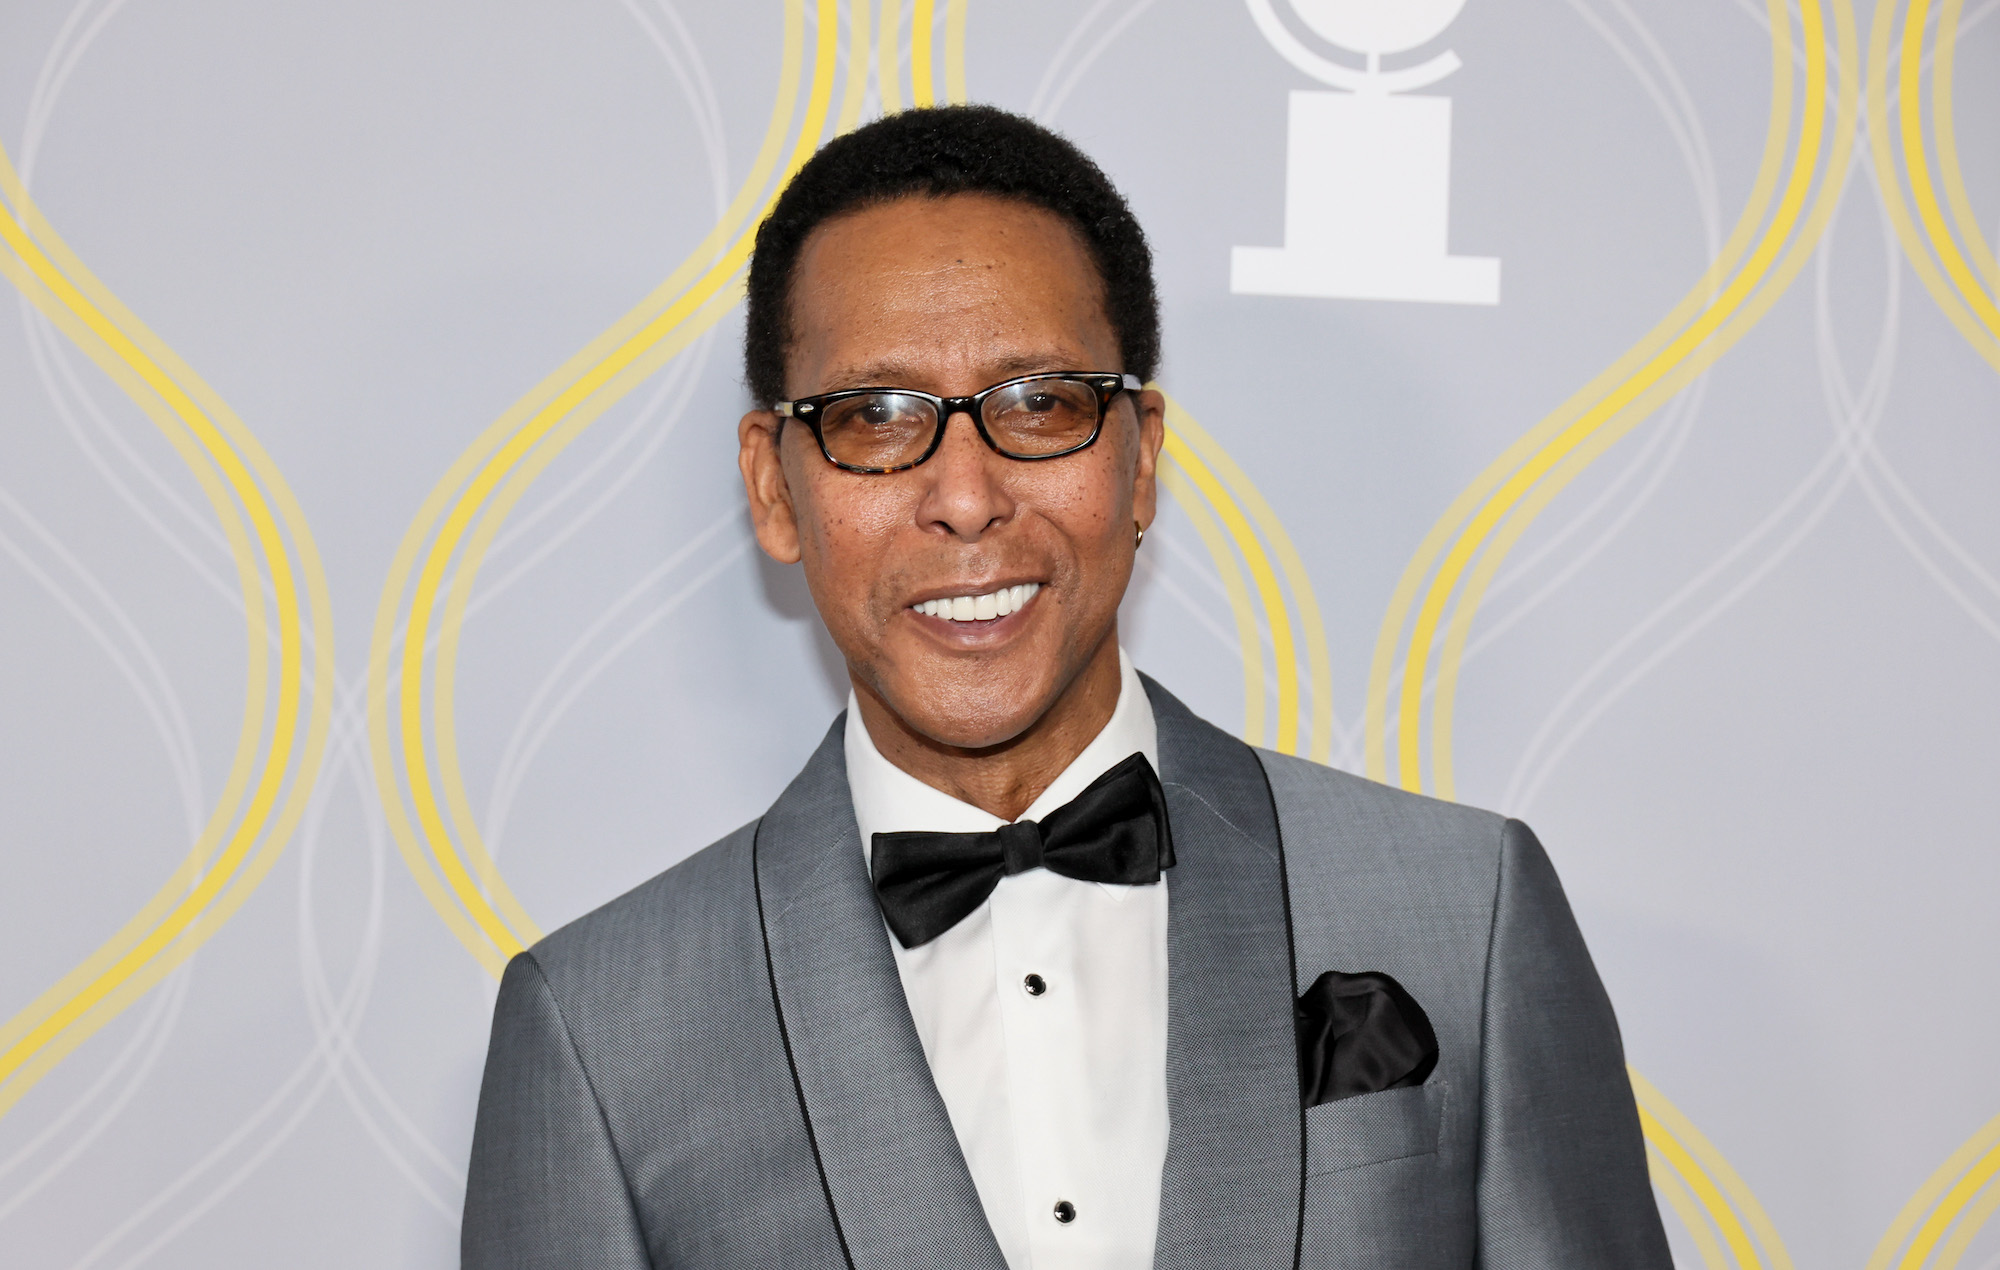 ‘This Is Us’ star Ron Cephas Jones dies aged 66